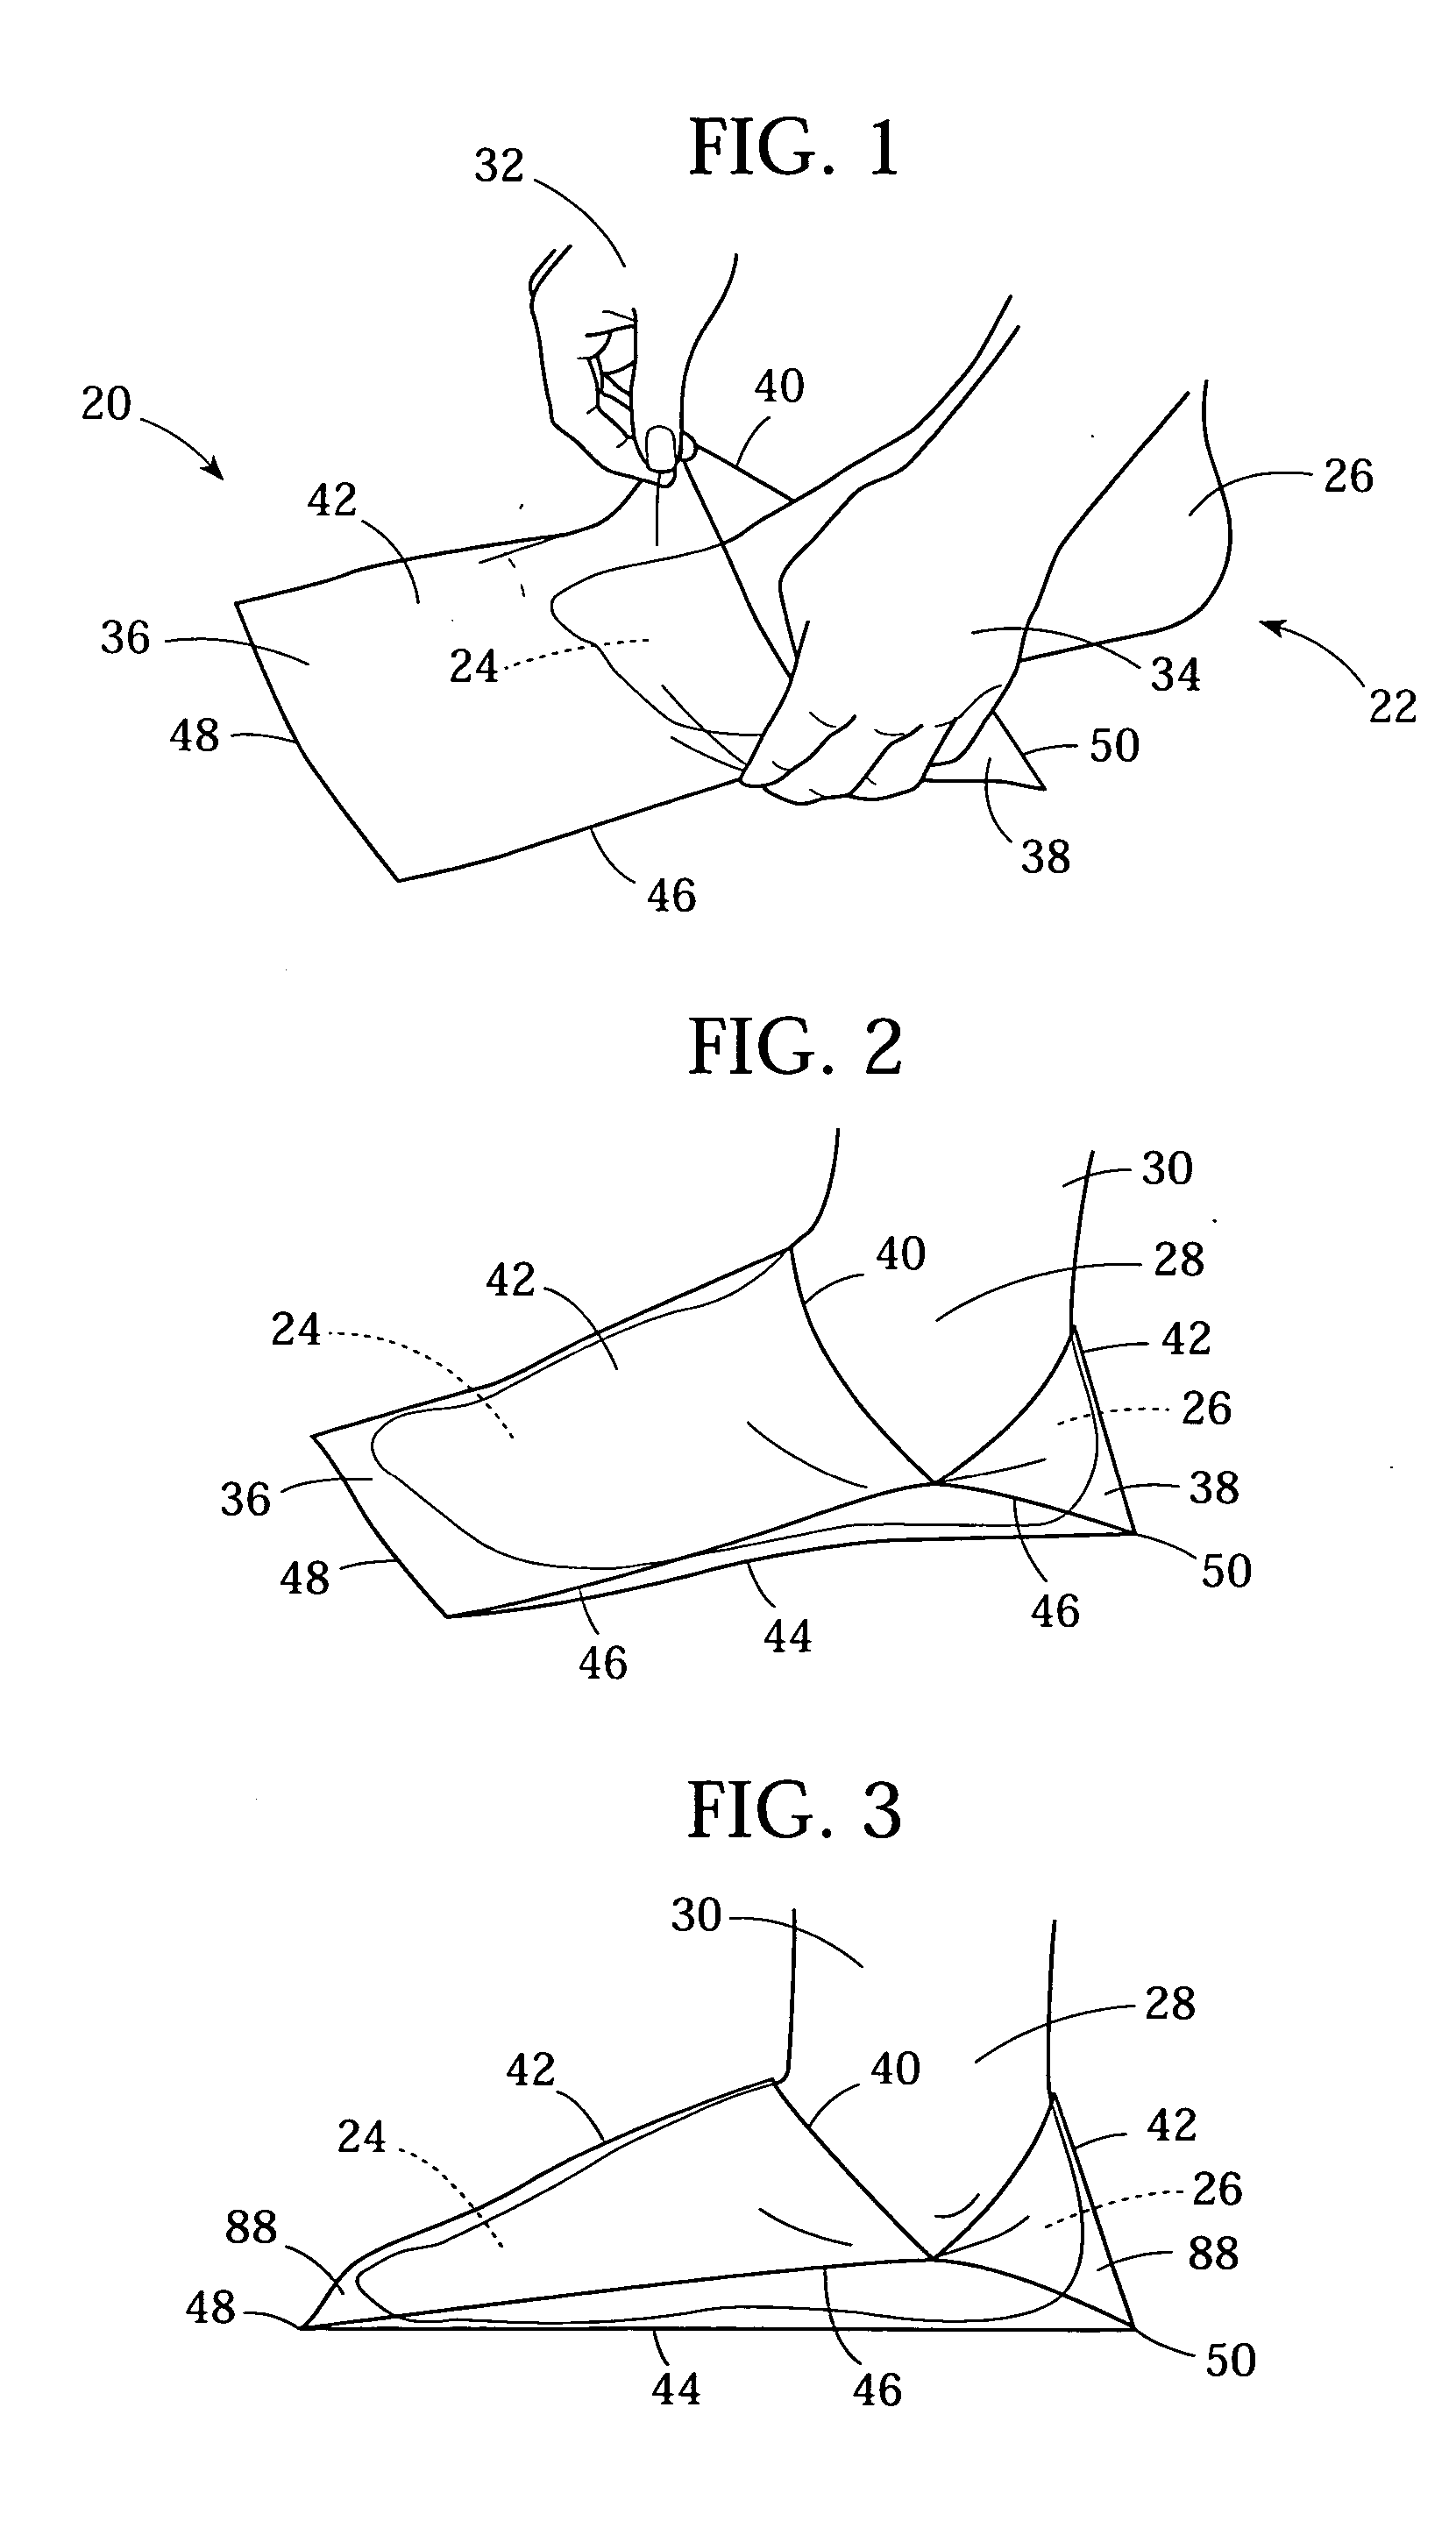 Low-cost disposable protective foot covering